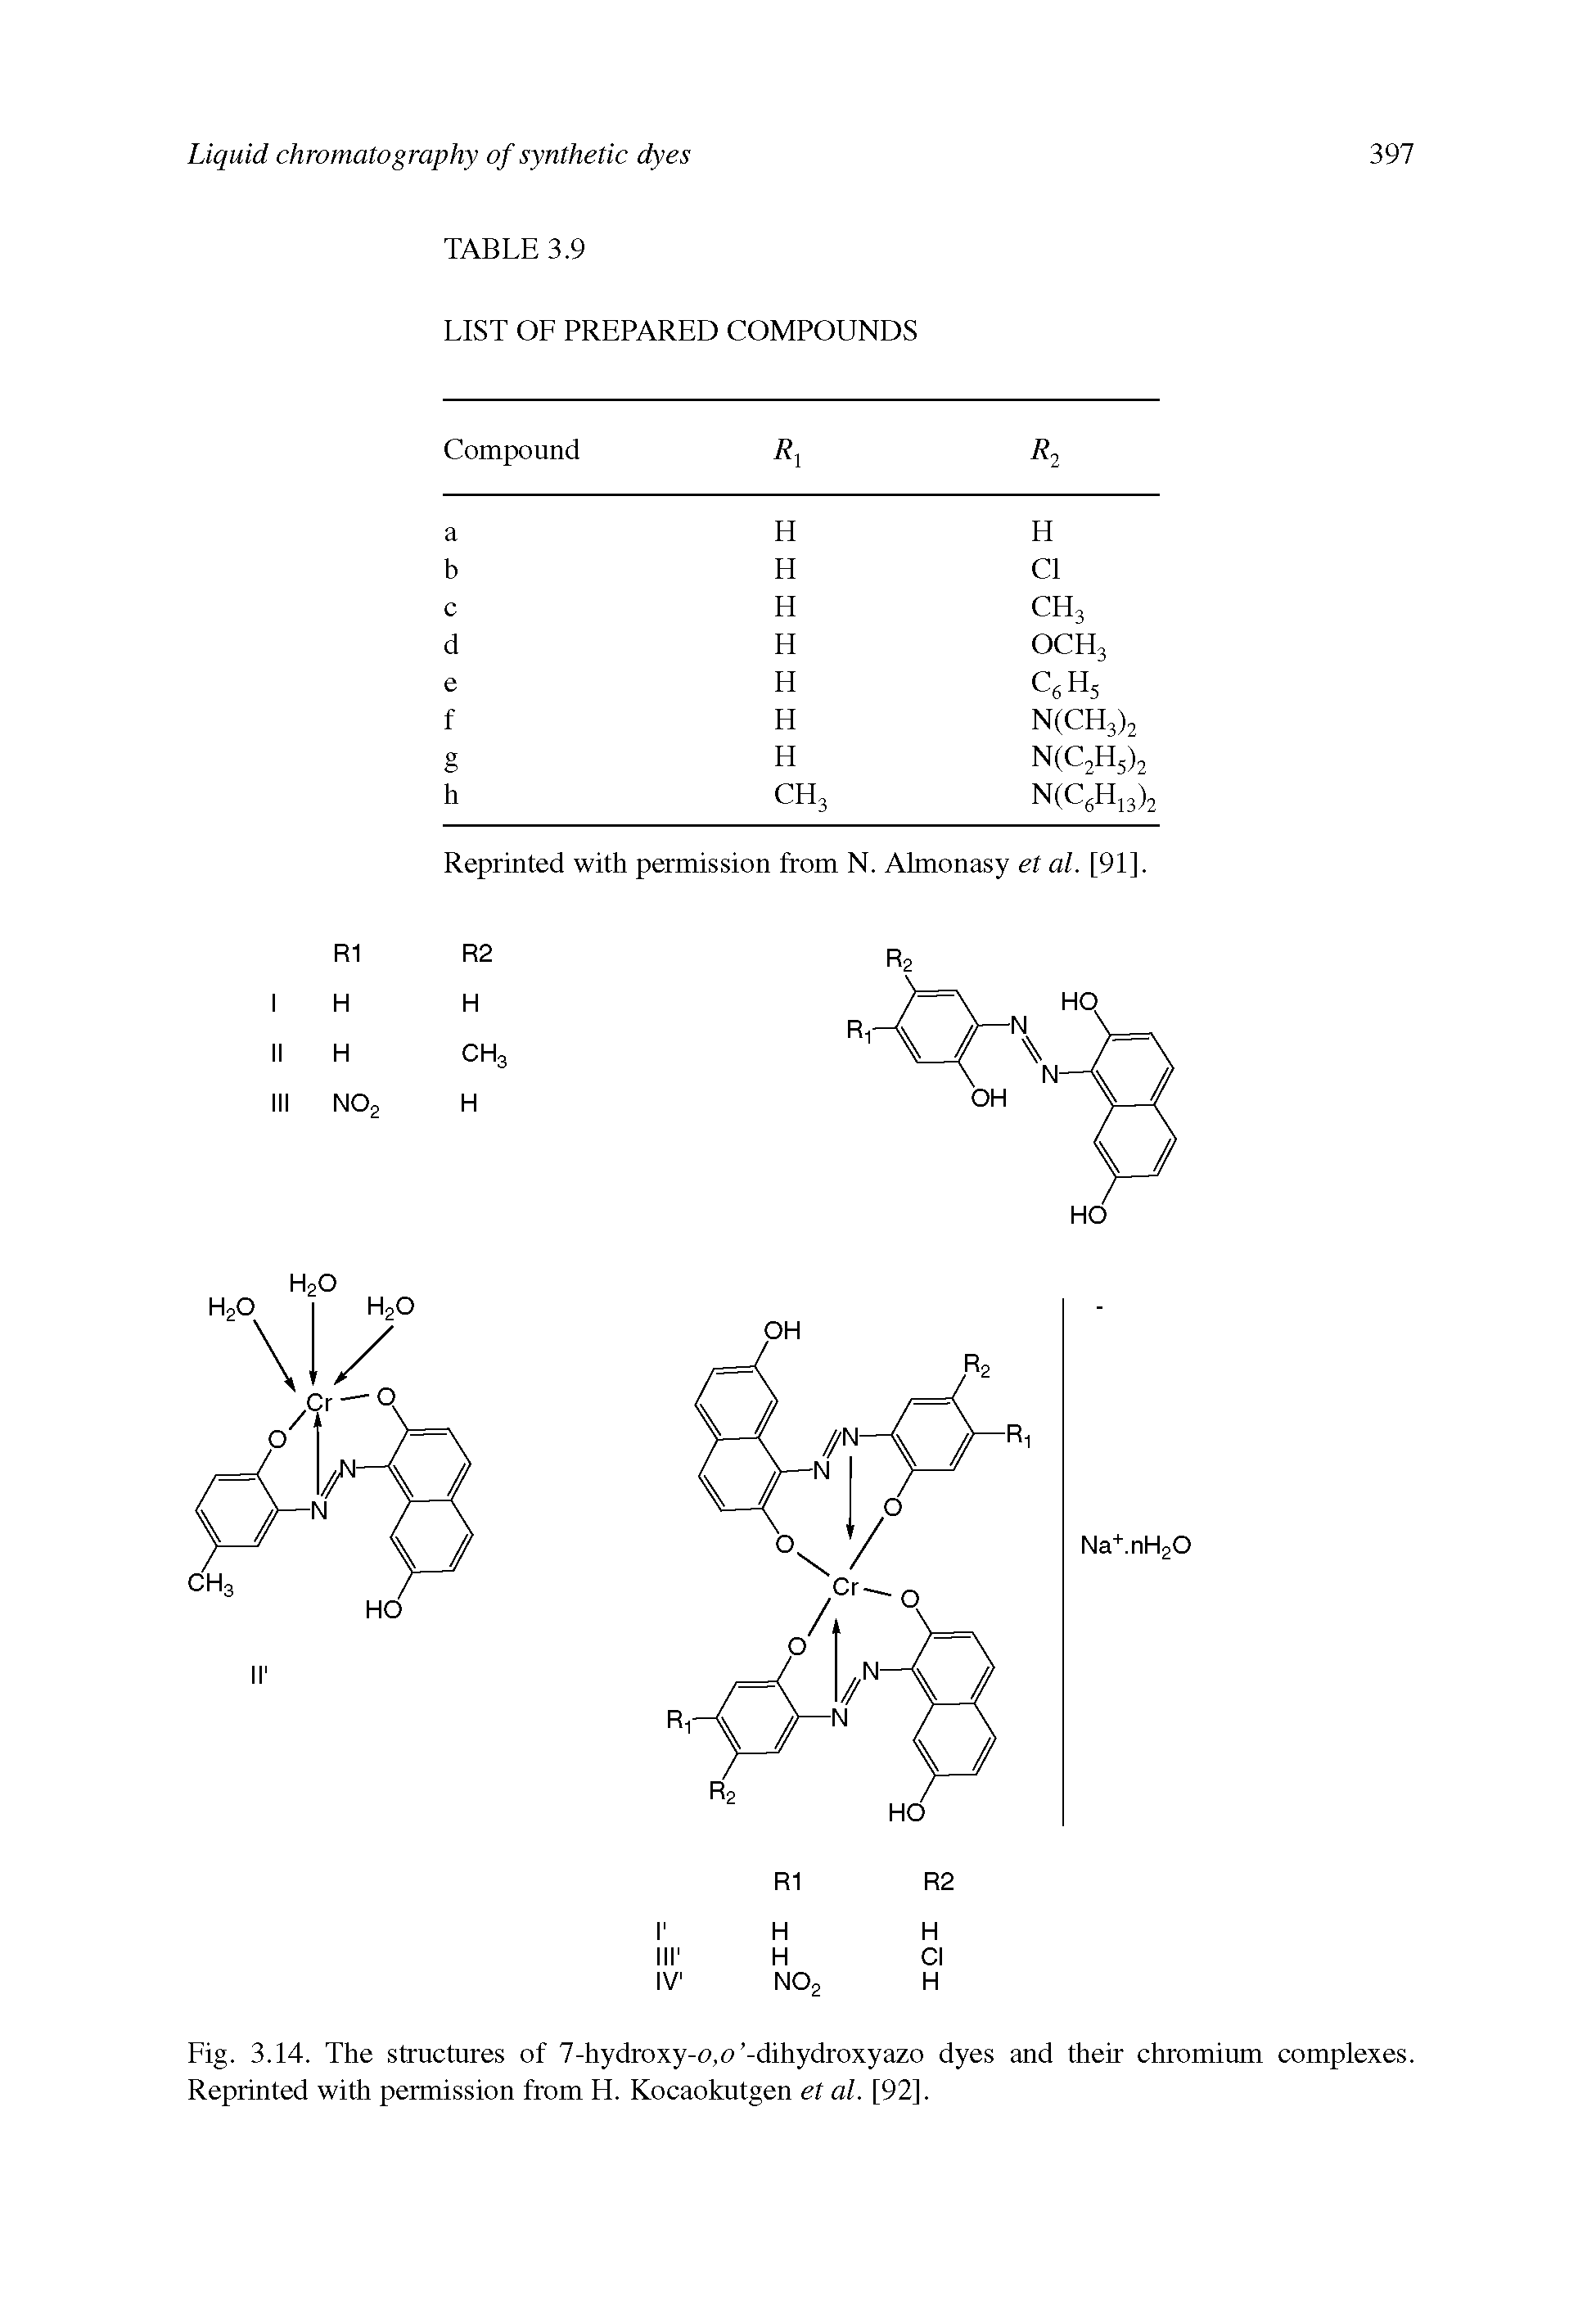 Fig. 3.14. The structures of 7-hydroxy-o,o -dihydroxy azo dyes and their chromium complexes. Reprinted with permission from H. Kocaokutgen et al. [92].